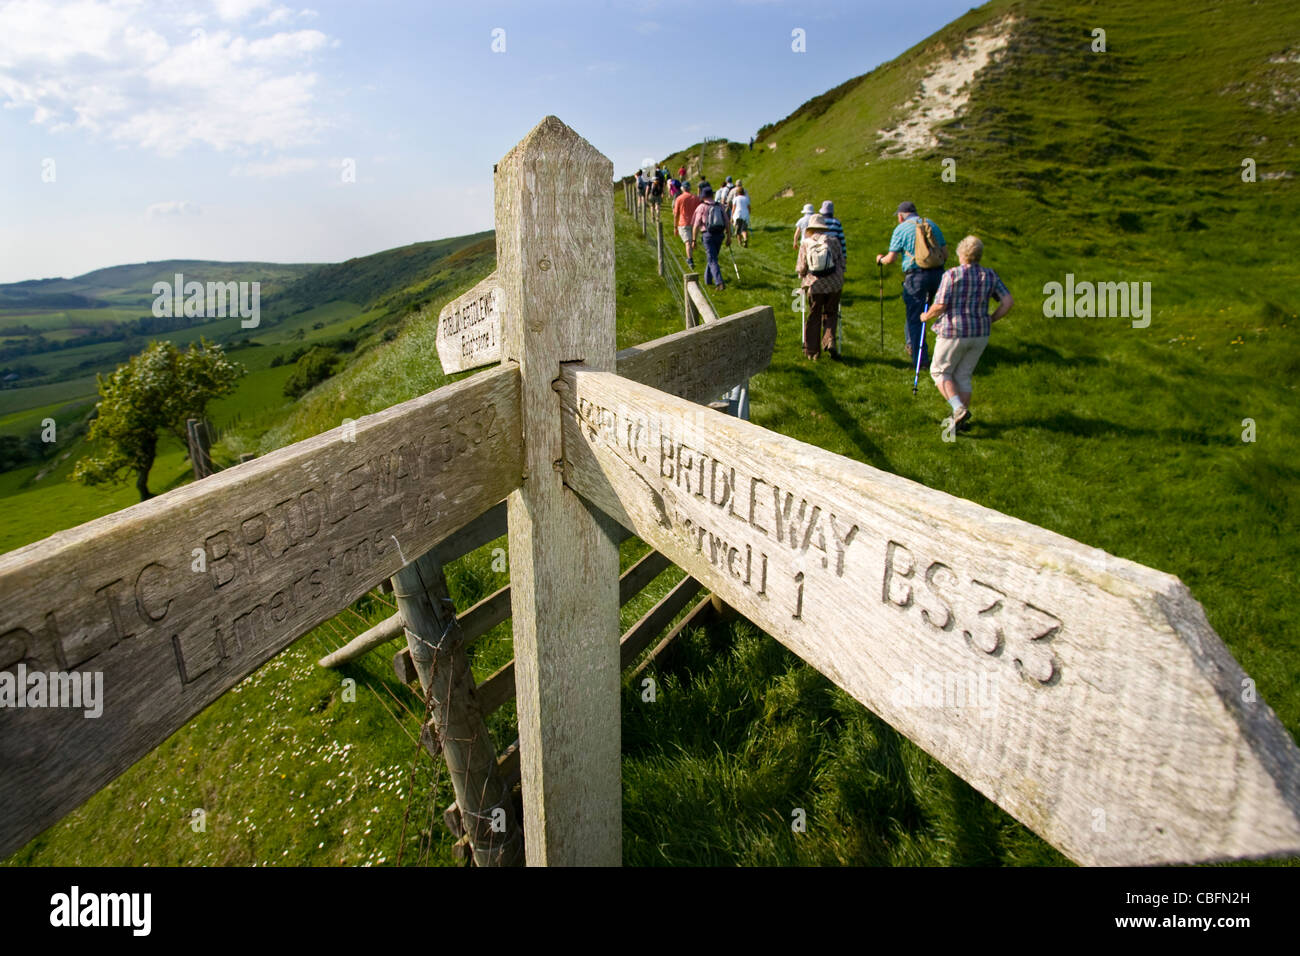 Brightstone, UK, England, Isle of Wight, Afternoon, Tea ansd Cake, Yafford, Walkers, Limerstone, Brighstone, Walking Festival Stock Photo